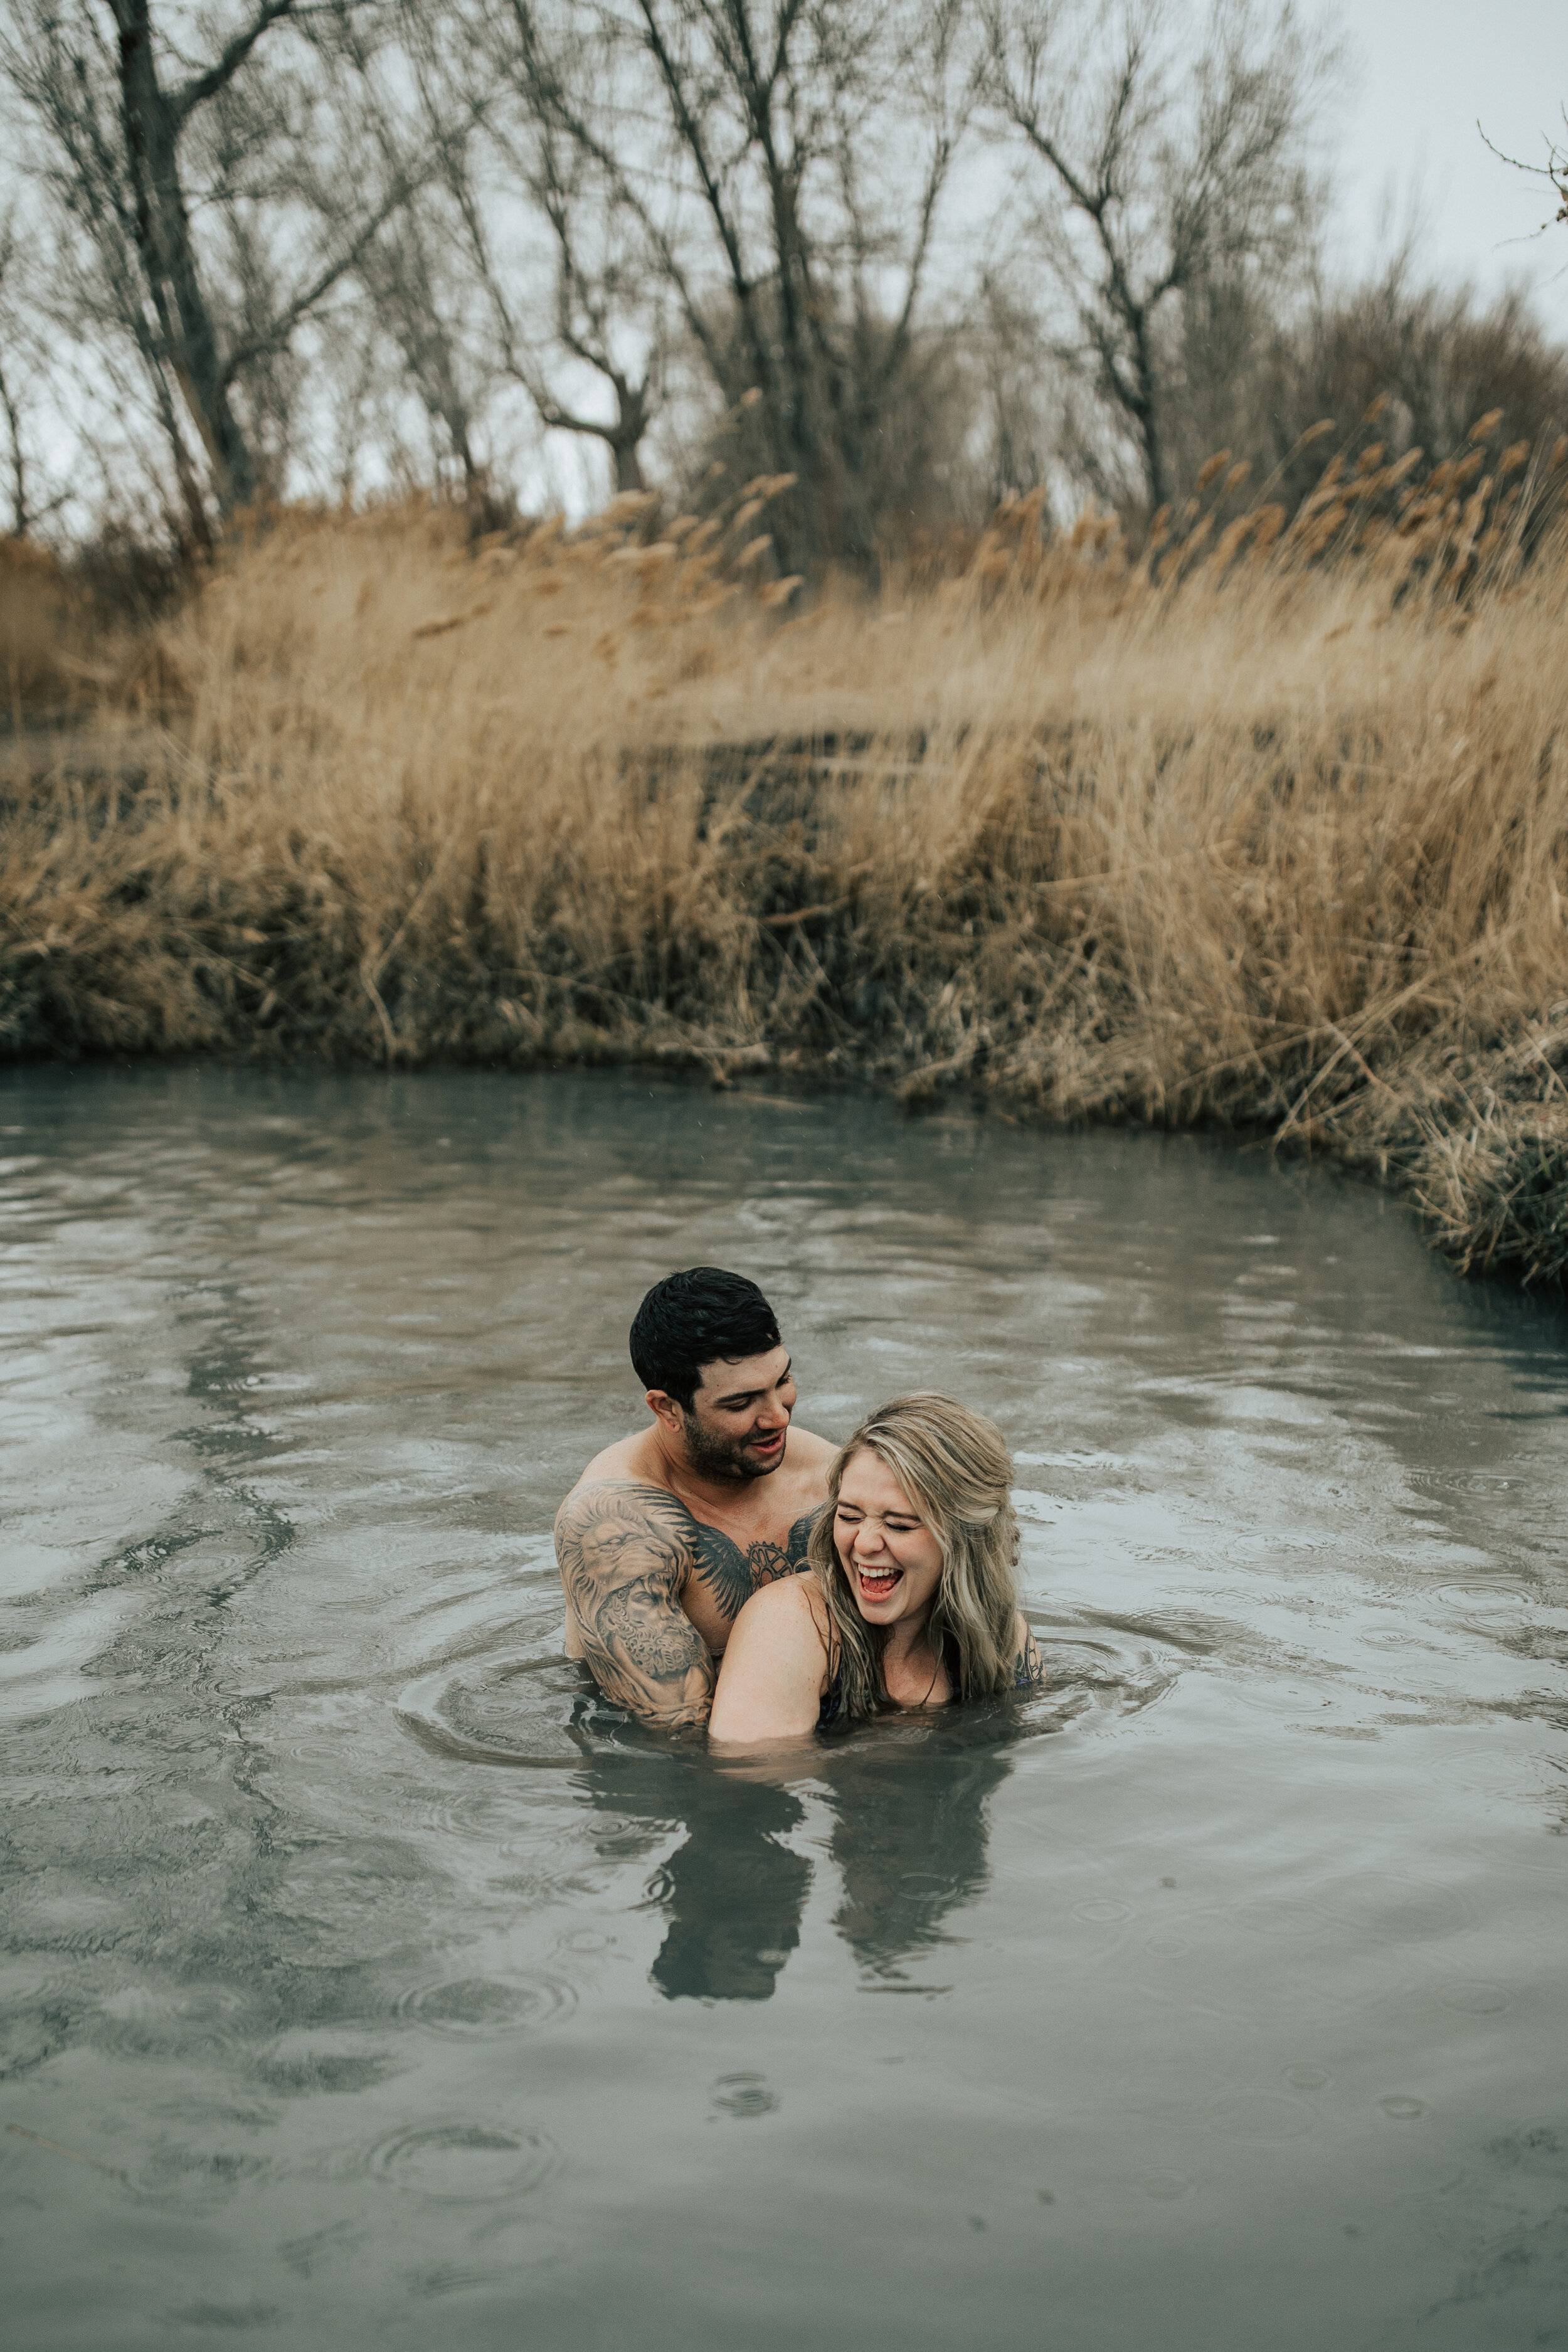  Couple laughing and playing in a pond, man holds woman, captured by Salt Lake City Photographer, Emily Jenkins. Couples in love unique couple poses park city photo shoot couple shoot couple in pond lovers couple photo ideas #utahcouplephotographer #